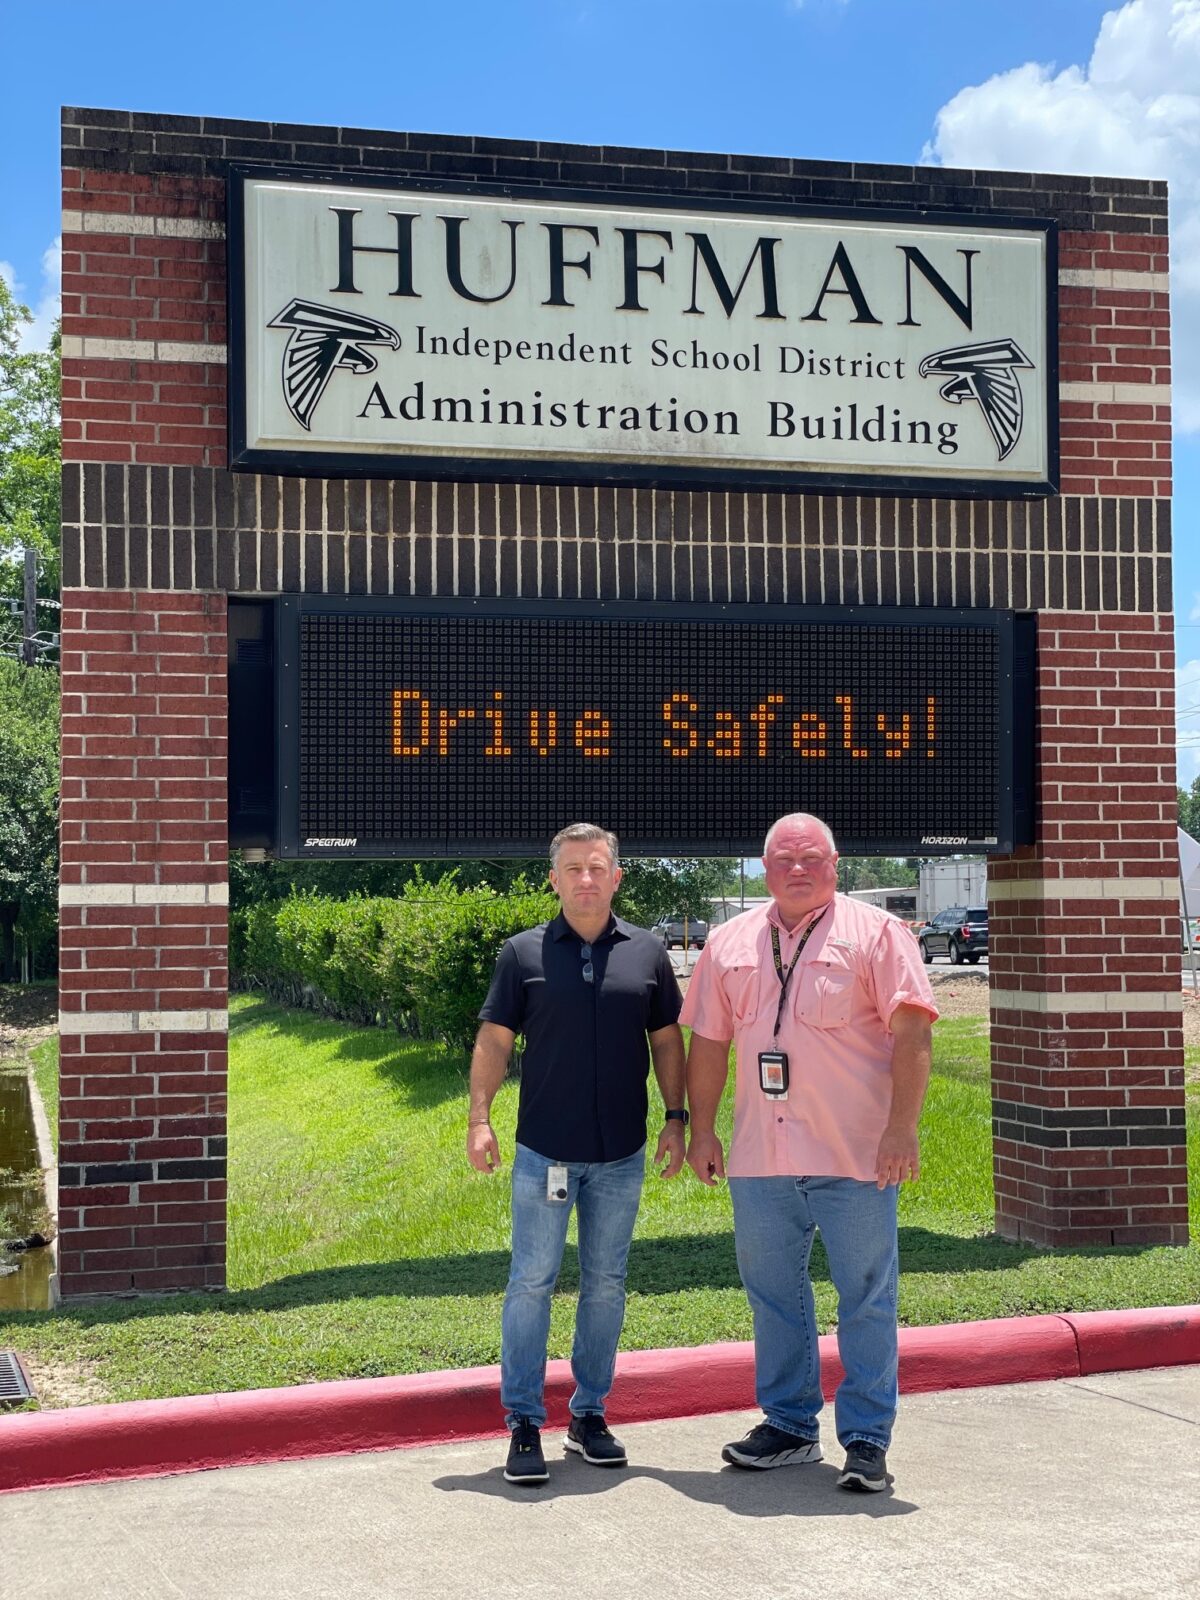 Huffman Independent School District Superintendent of Schools Benny Soileau (left) and Chief of Police David Williams for the Huffman Independent School District (right), stand before the sign for the Huffman County Independent School District Administration Building.